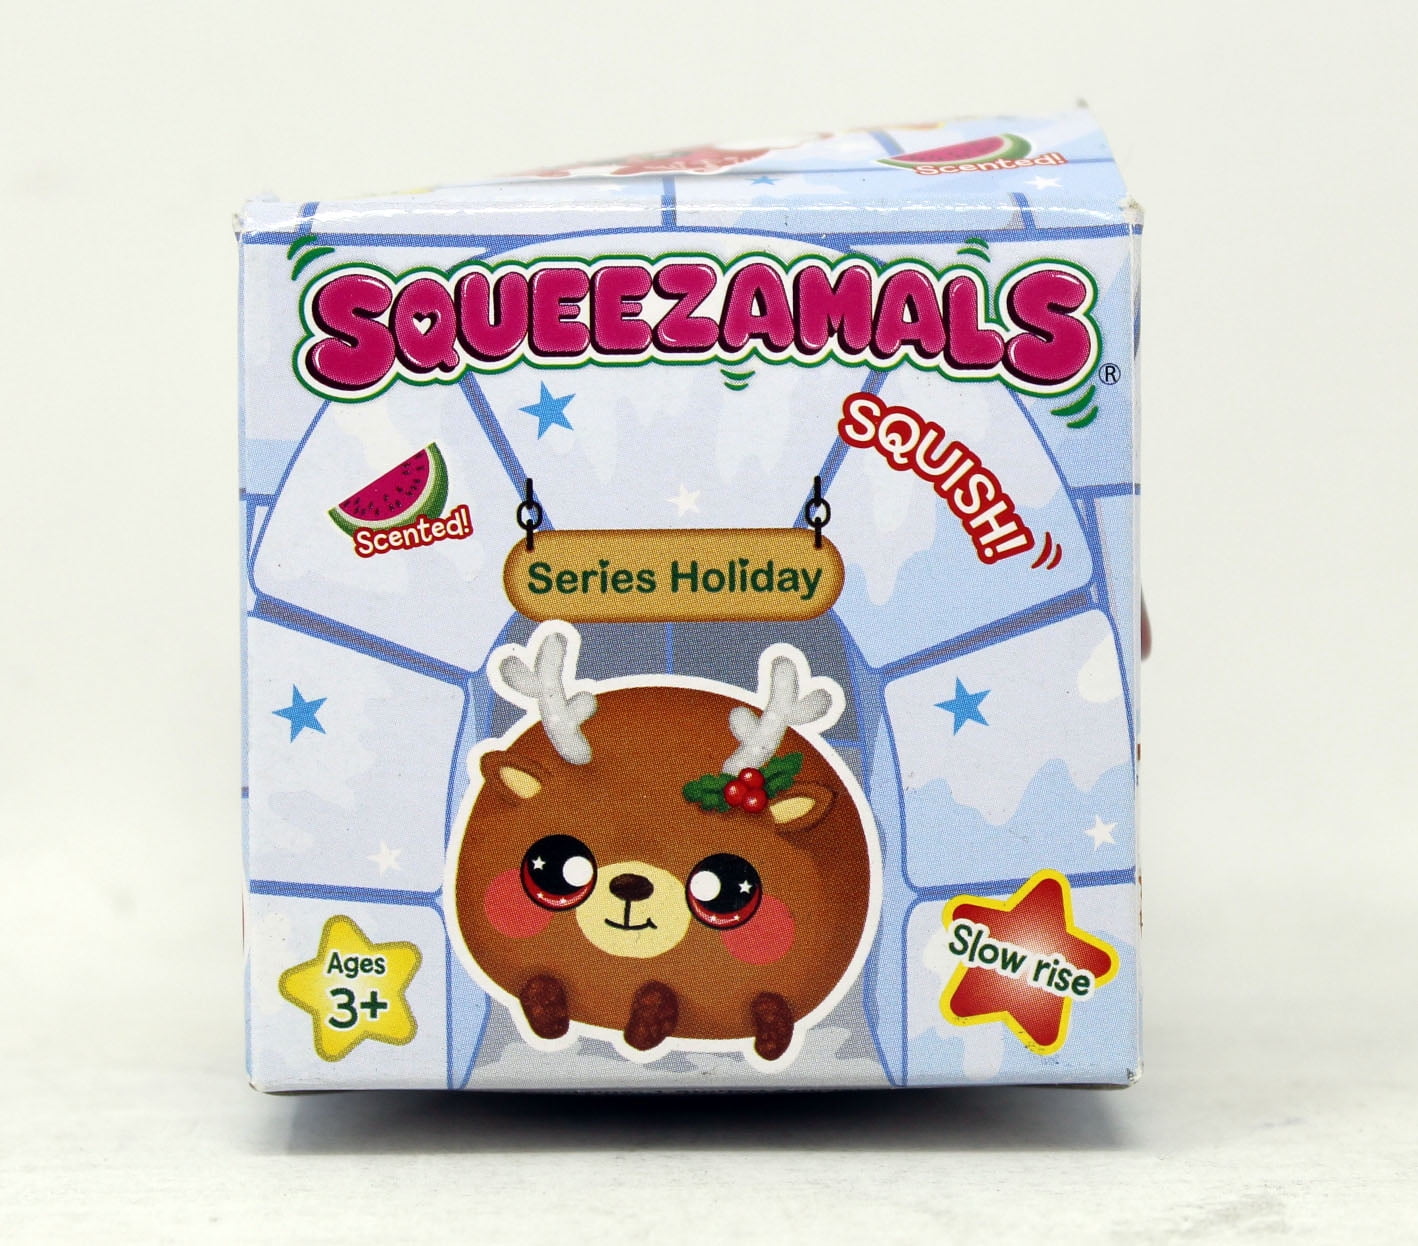 Lot of 6 Squeezamals Holiday Series Scented 2.5" Special Edition Blind Box New 